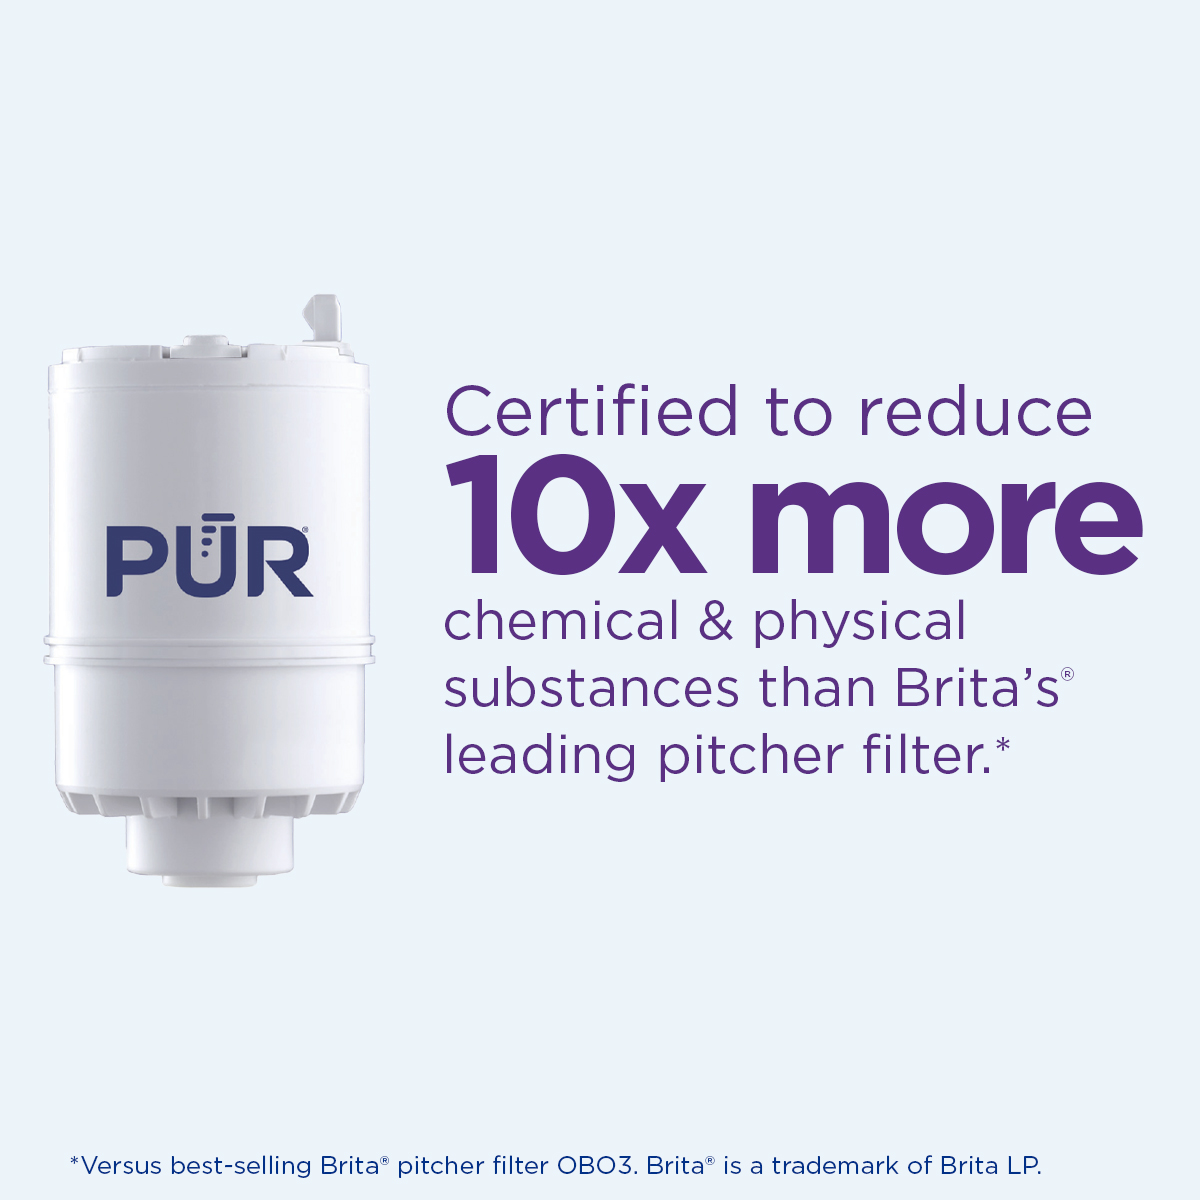 PUR Faucet Mount Water Filtration System, Vertical, White, FM3333B - image 2 of 10